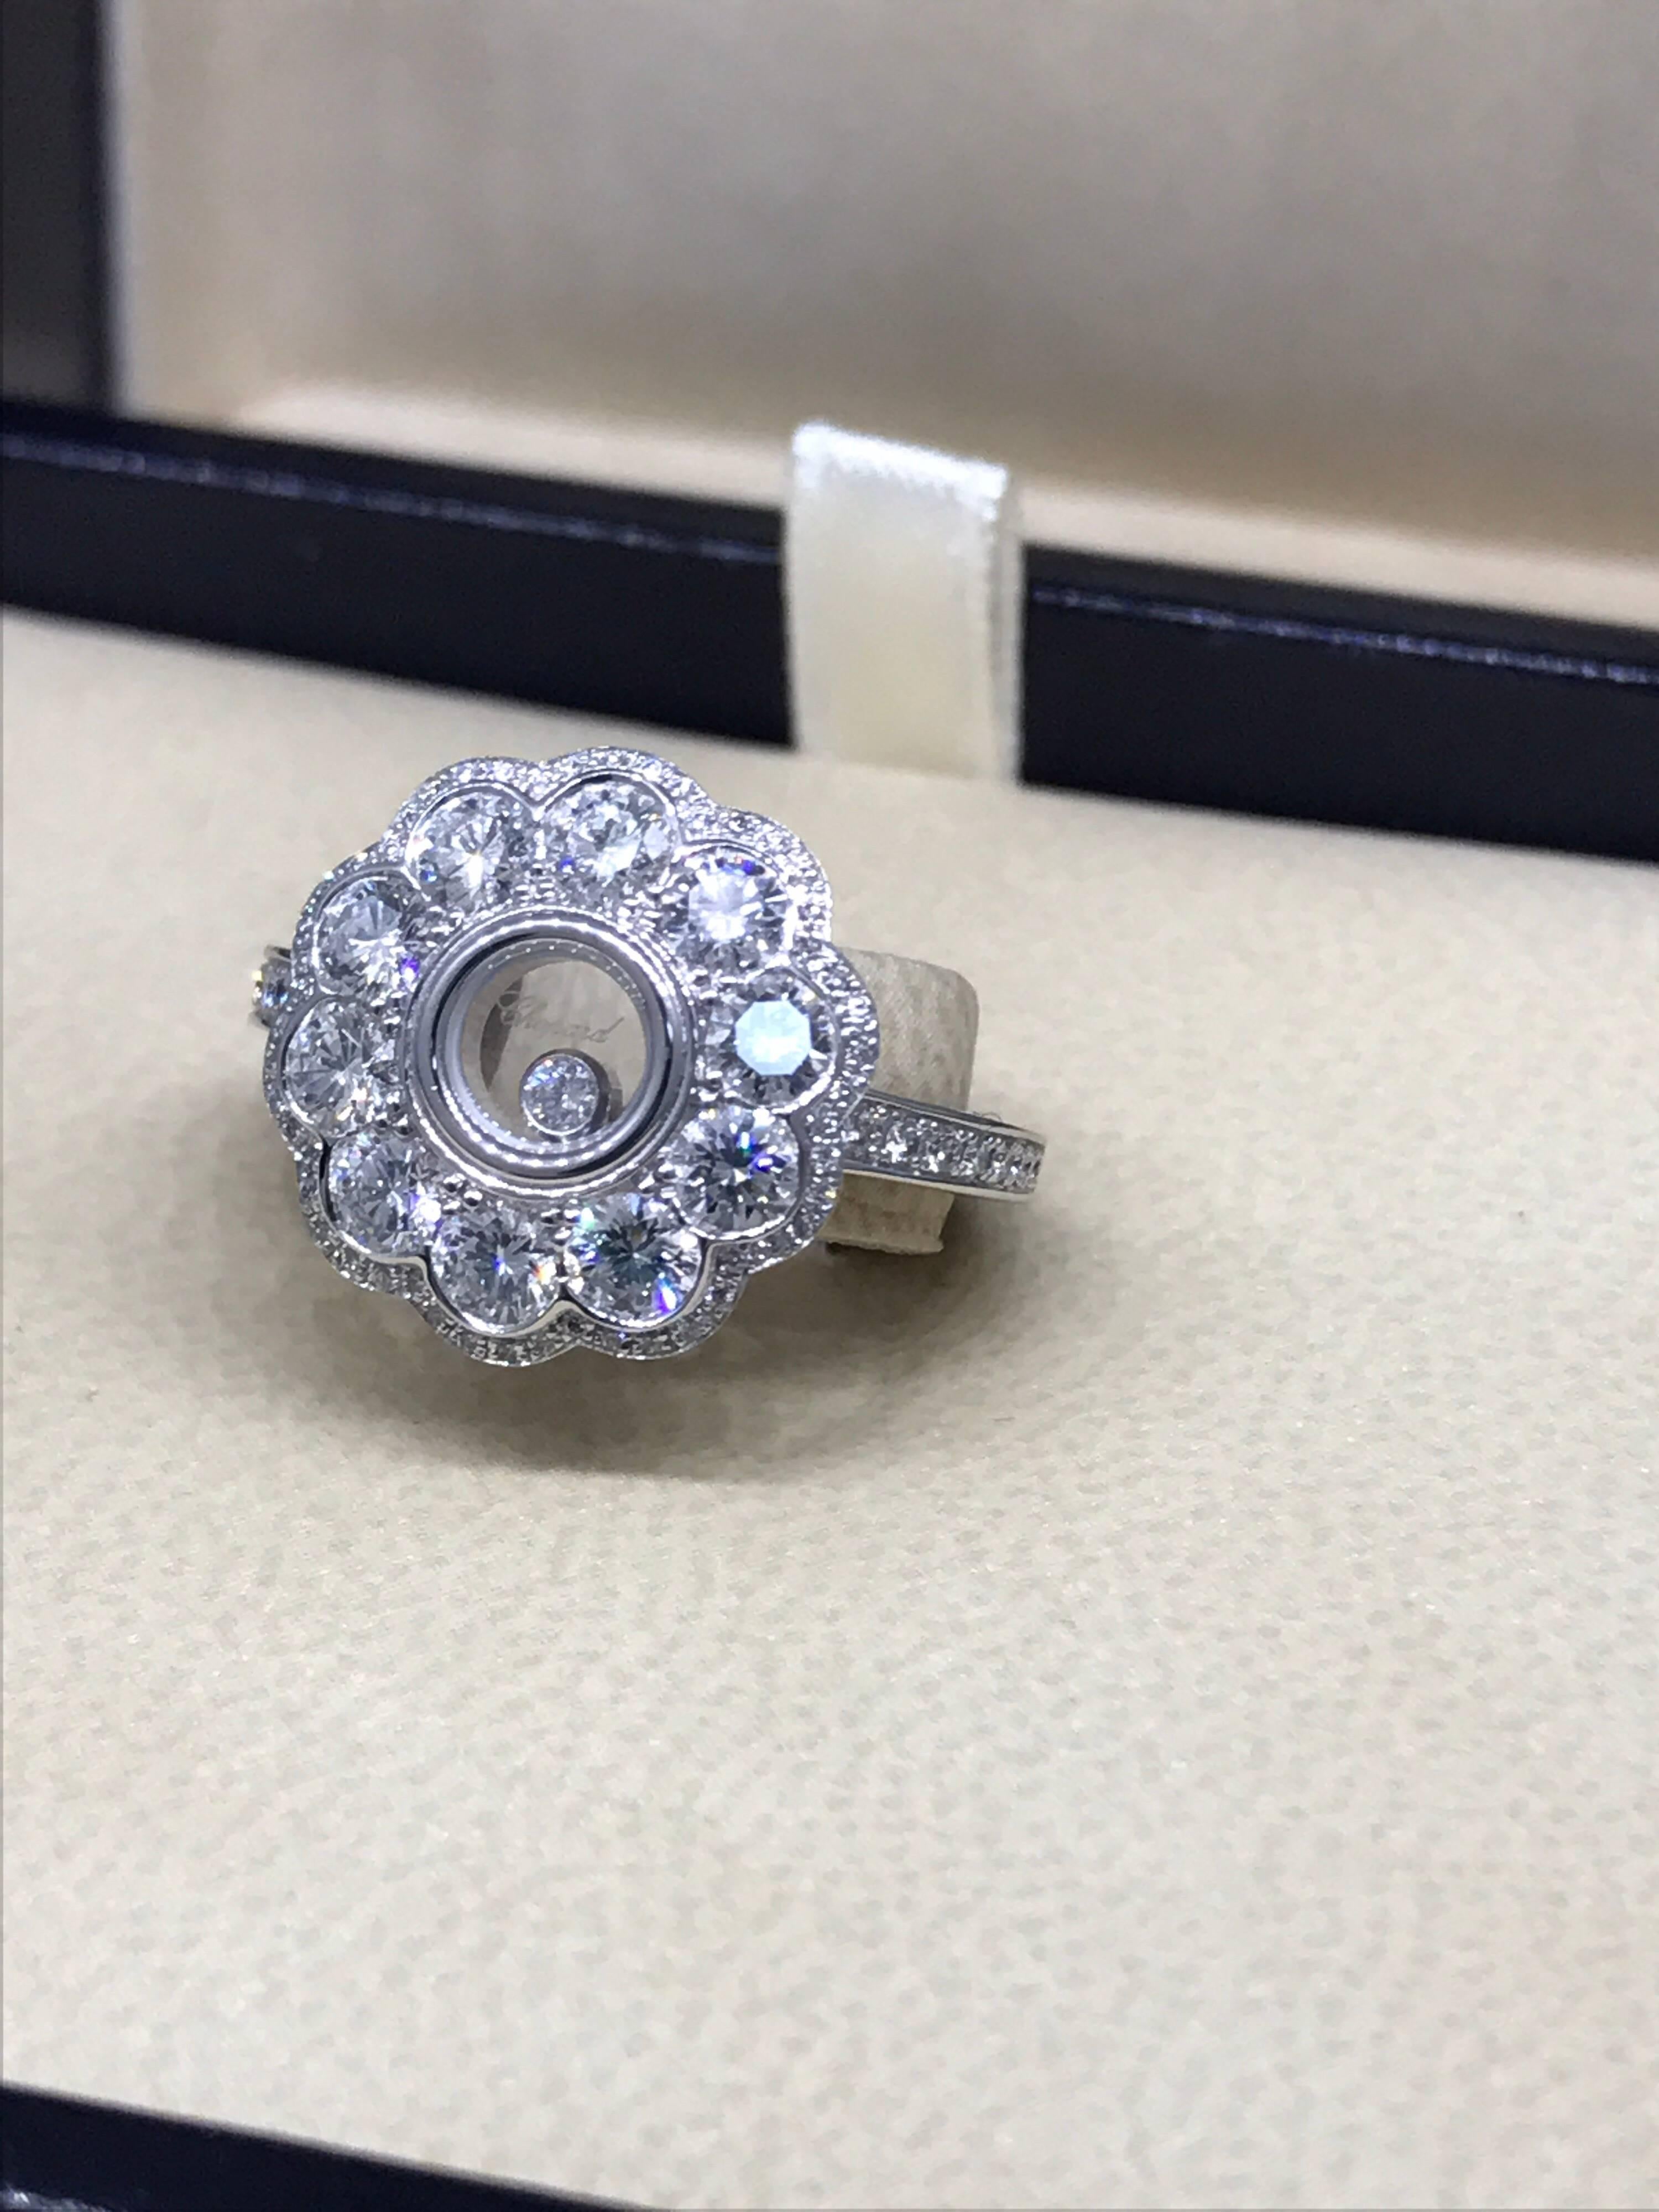 Chopard Happy Diamonds Flower Ring

Model Number: 82/6569-1208

100% Authentic

Brand New

Comes with original Chopard box, certificate of authenticity and warranty, and jewels manual

18 Karat White Gold (6.60gr)

88 Diamonds on the ring (1.32